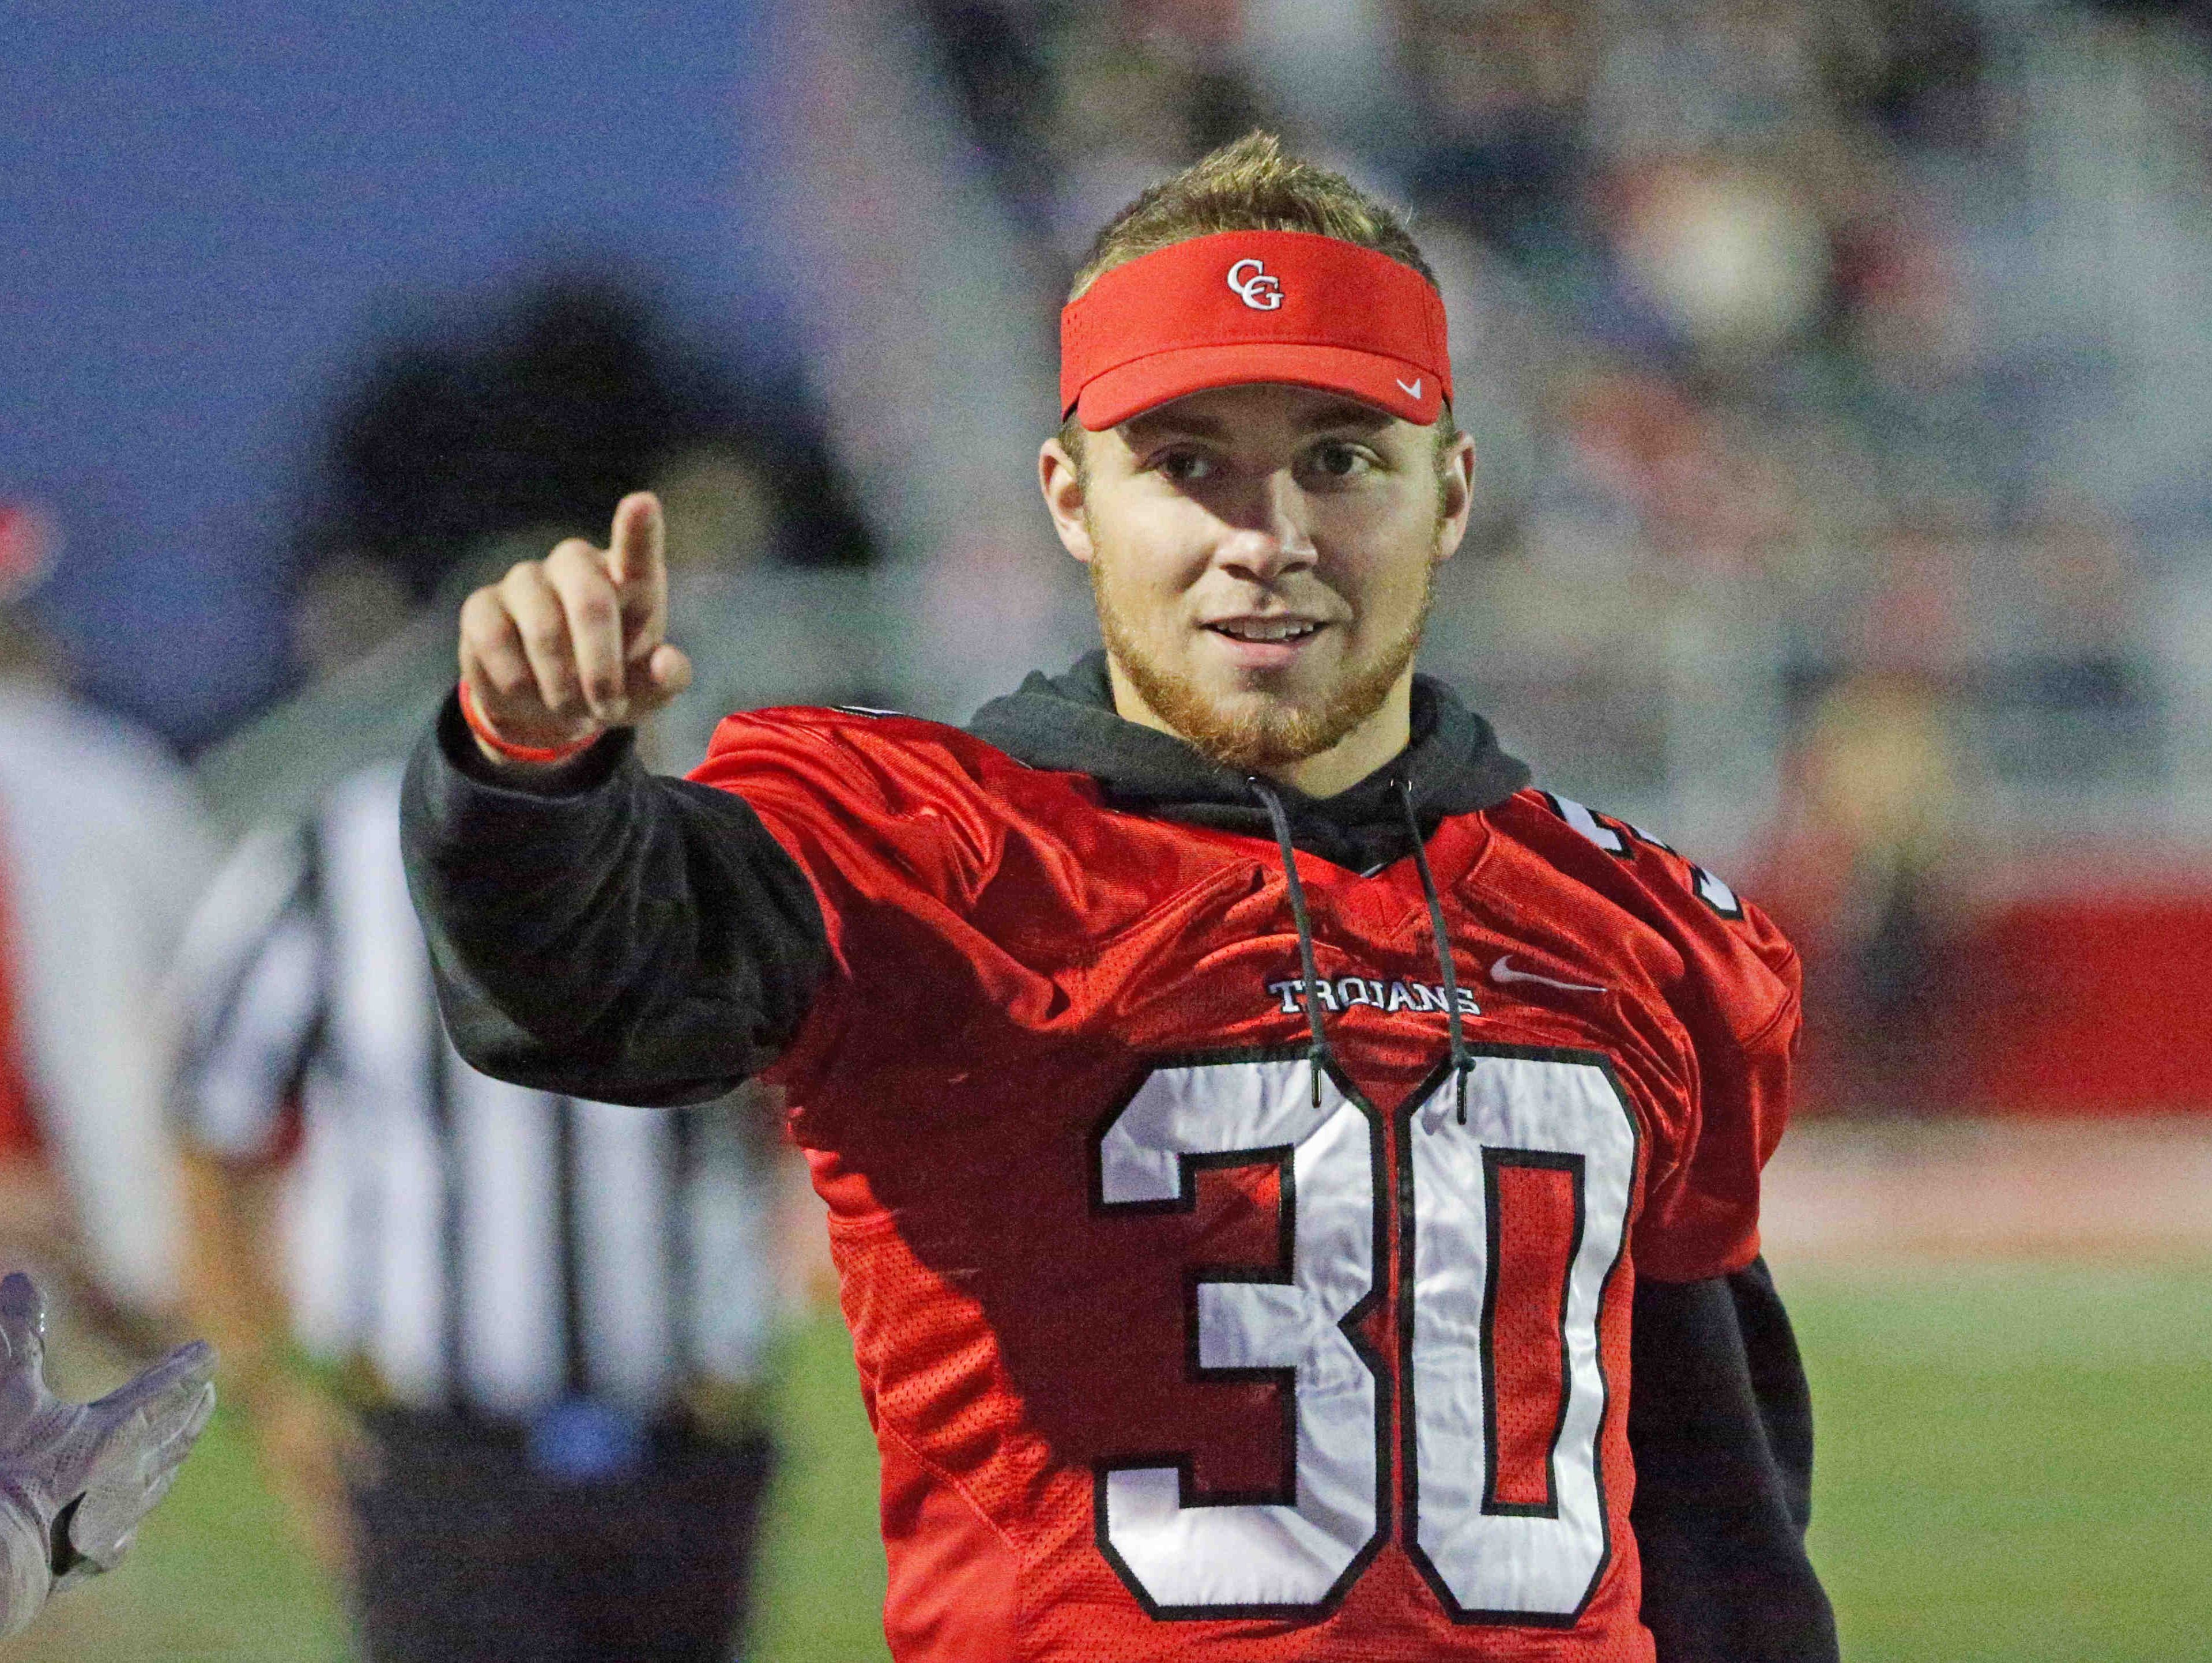 Center Grove's Titus McCoy cheers from the sideline during the Trojans' win over Cathedral on Friday.